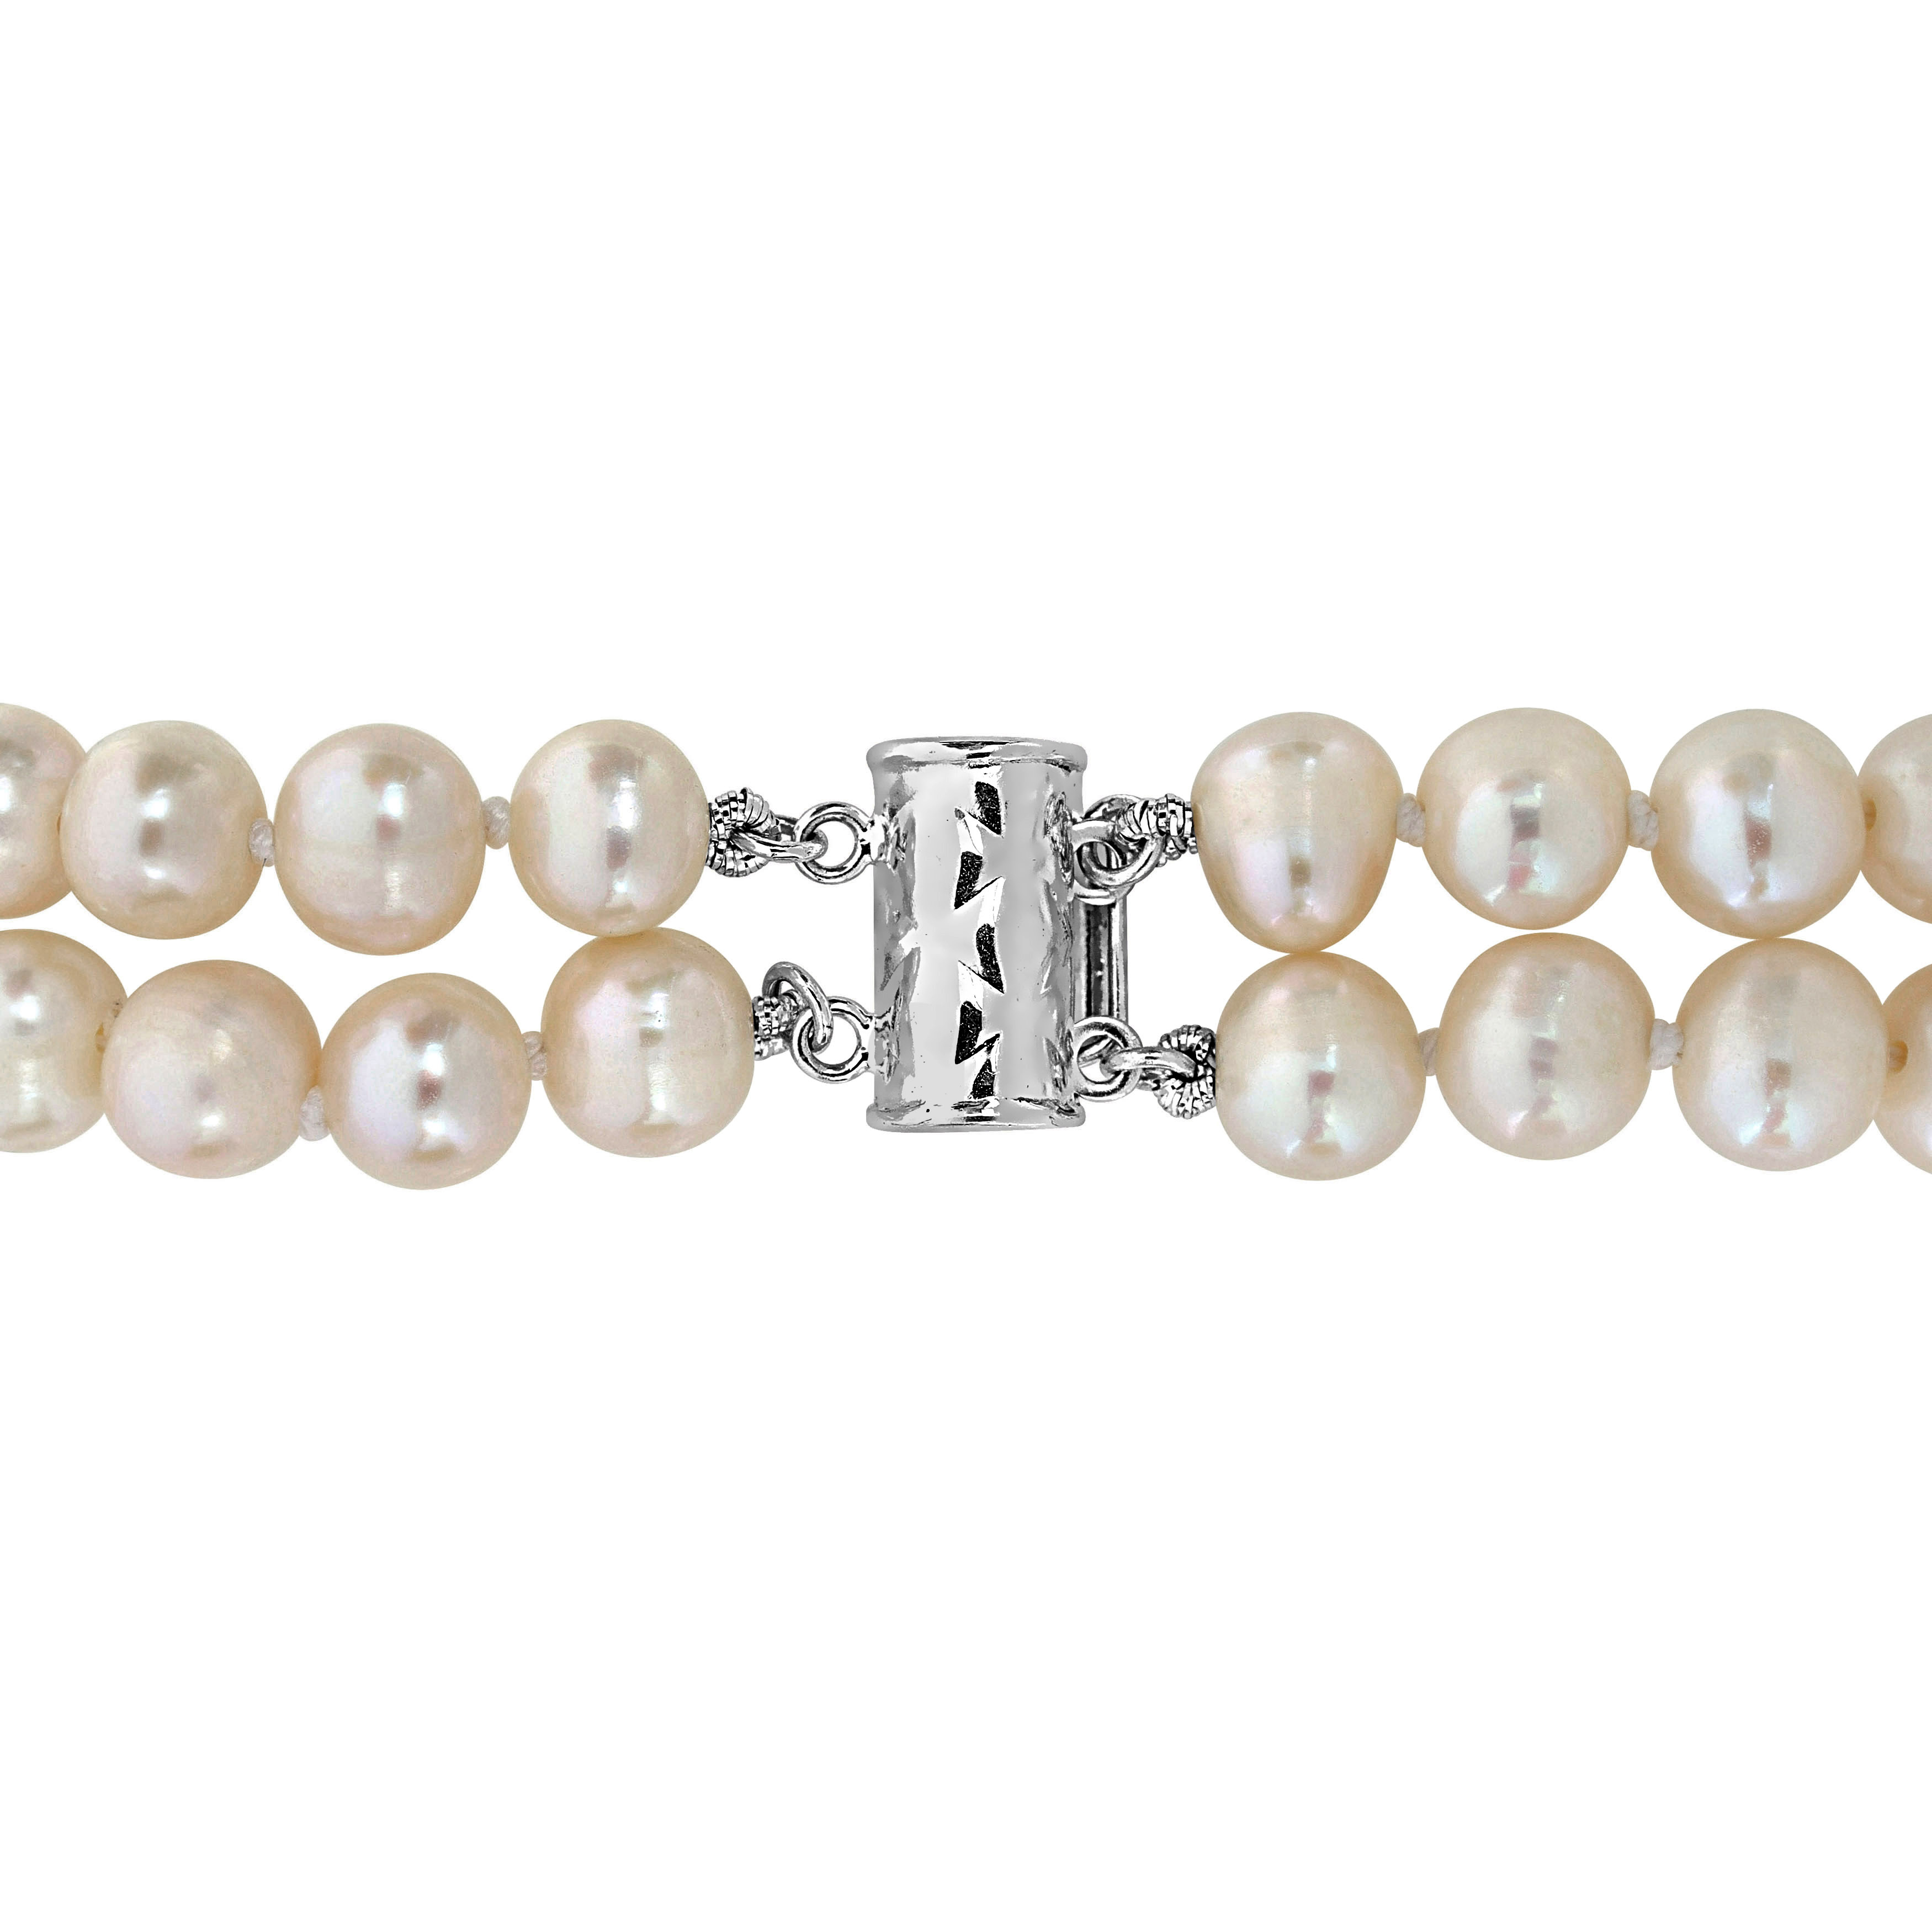 6-7mm Cultured Freshwater Pearl Double-Row Bracelet in Sterling Silver